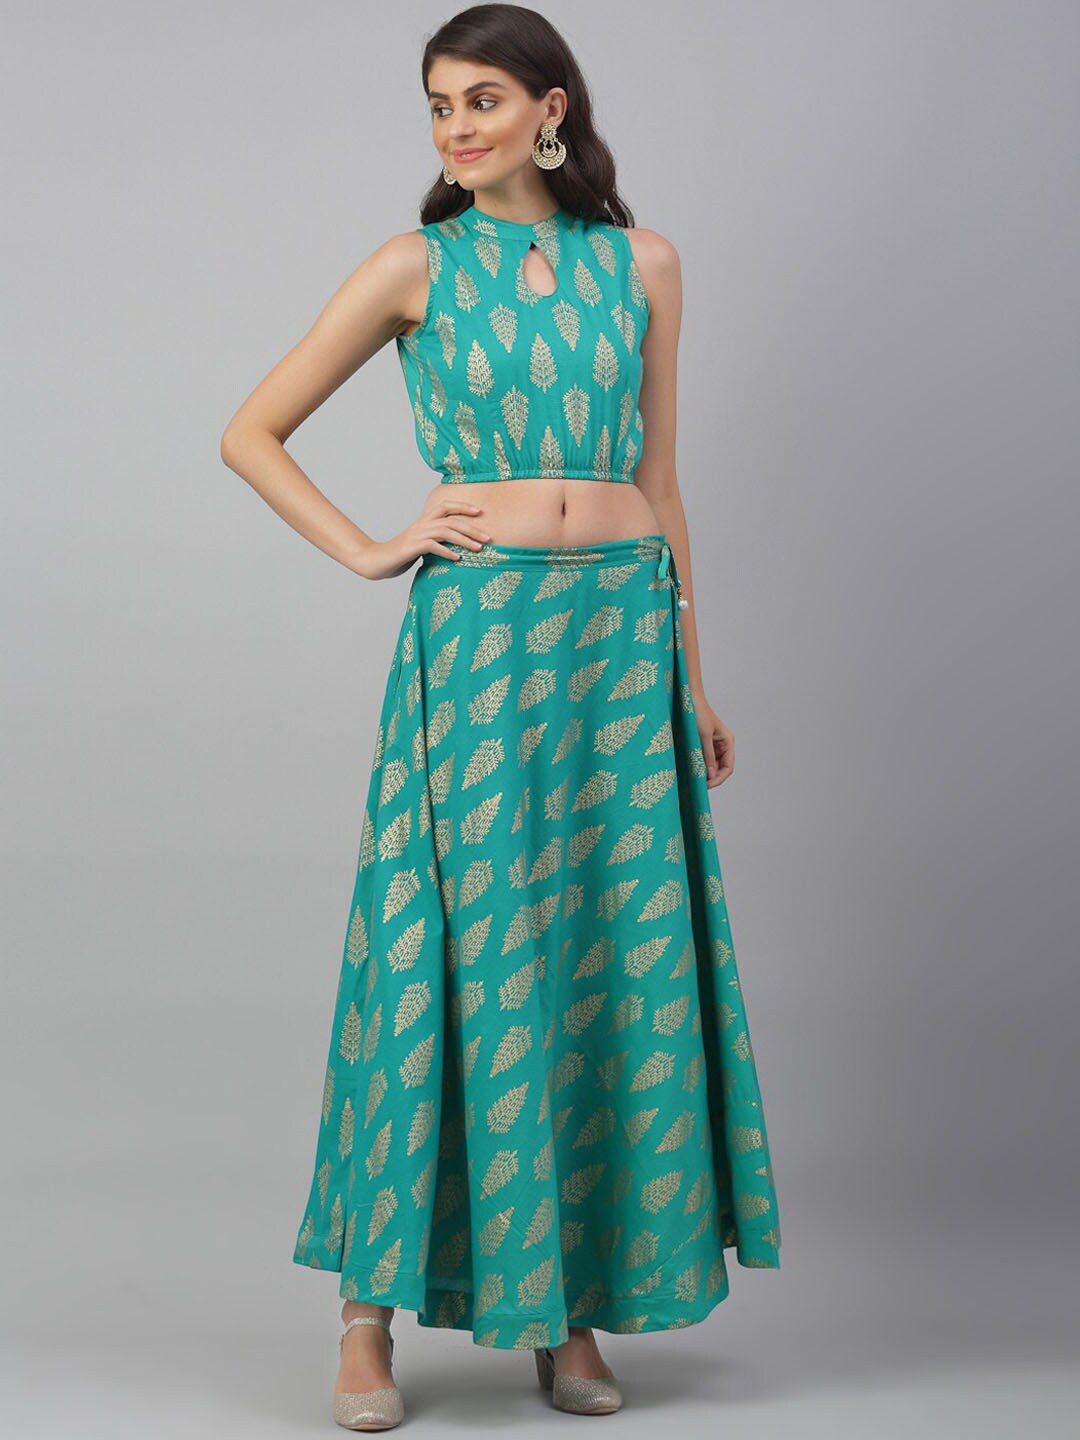 ANAISA Women Teal & Gold-Toned Printed Top with Skirt Price in India